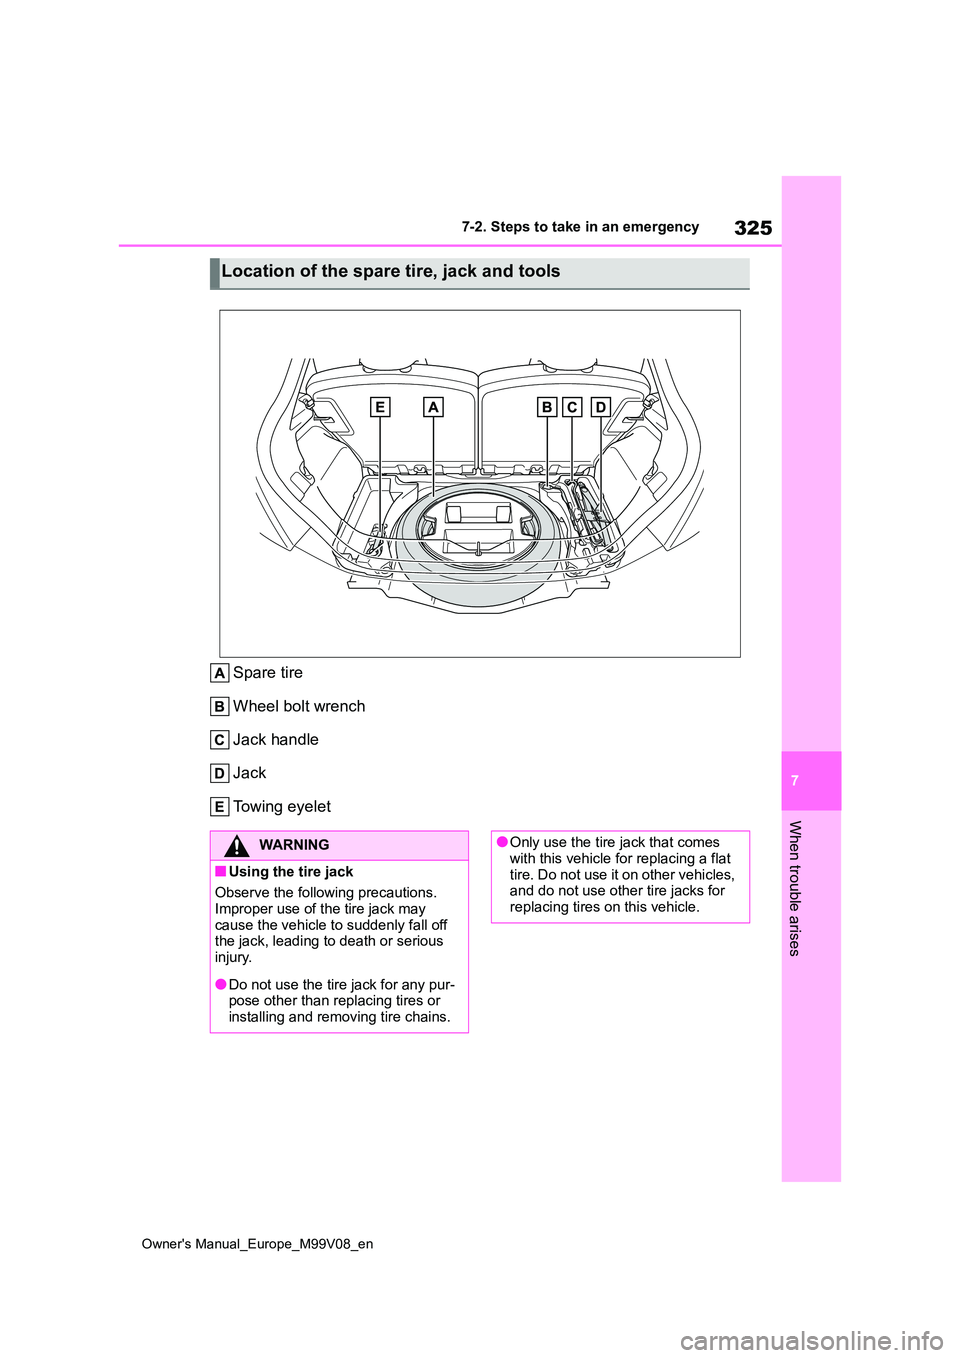 TOYOTA AYGO X 2022  Owners Manual (in English) 325
7
Owner's Manual_Europe_M99V08_en
7-2. Steps to take in an emergency
When trouble arises
Spare tire 
Wheel bolt wrench
Jack handle 
Jack 
Towing eyelet
Location of the spare tire, jack and too